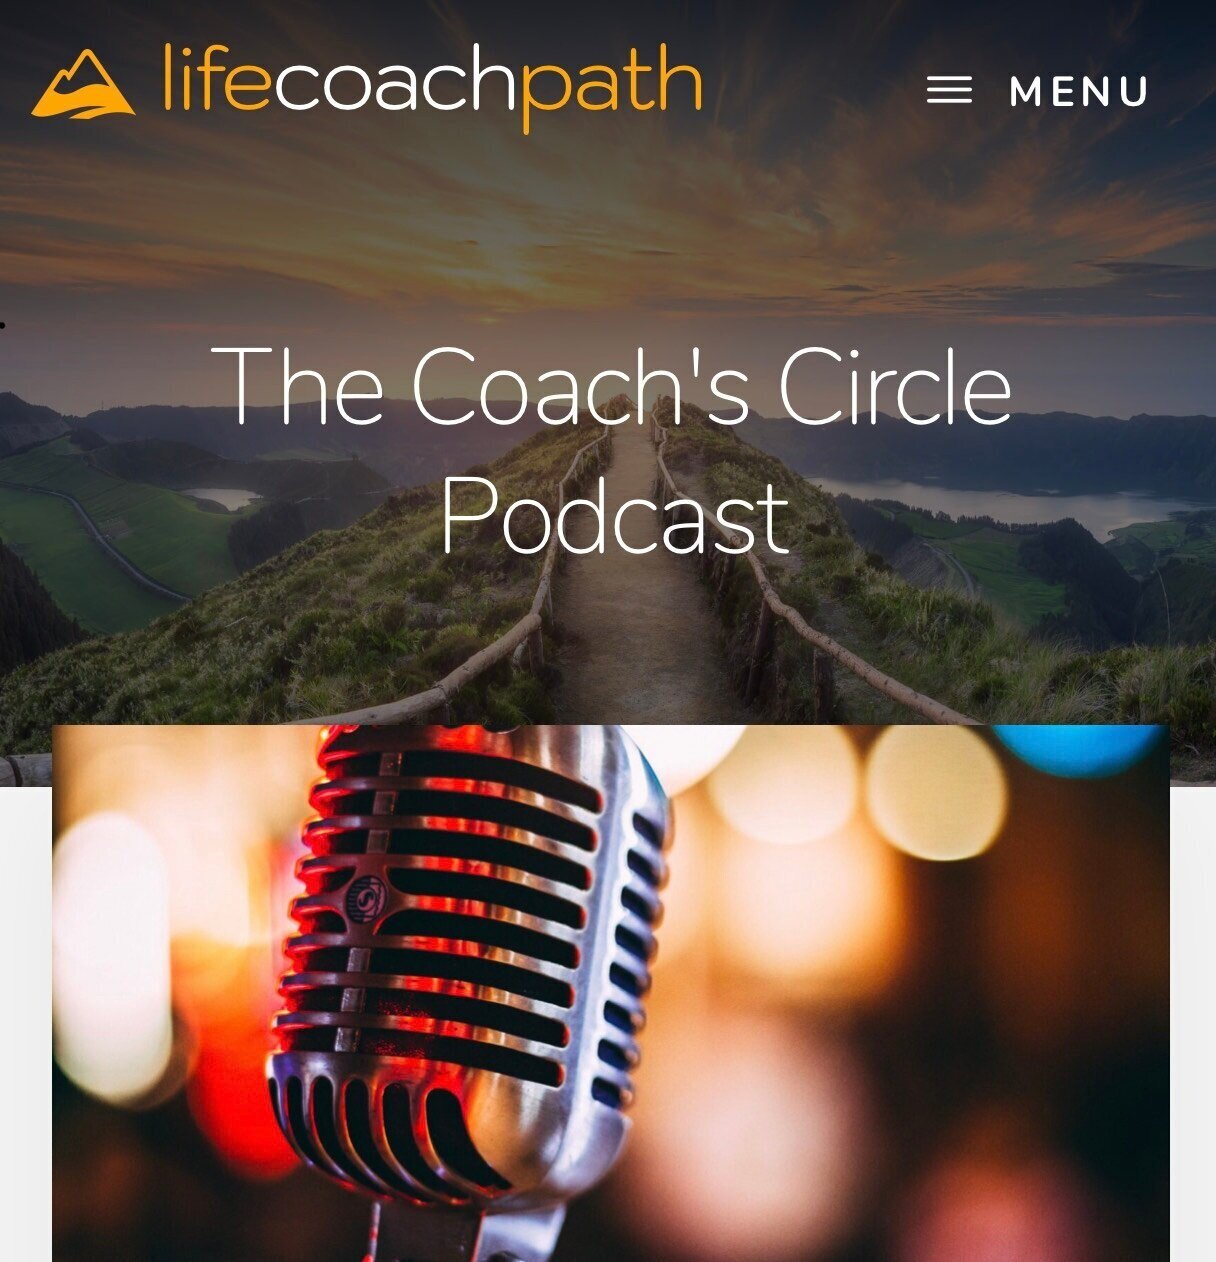 The Coach's Circle Podcast